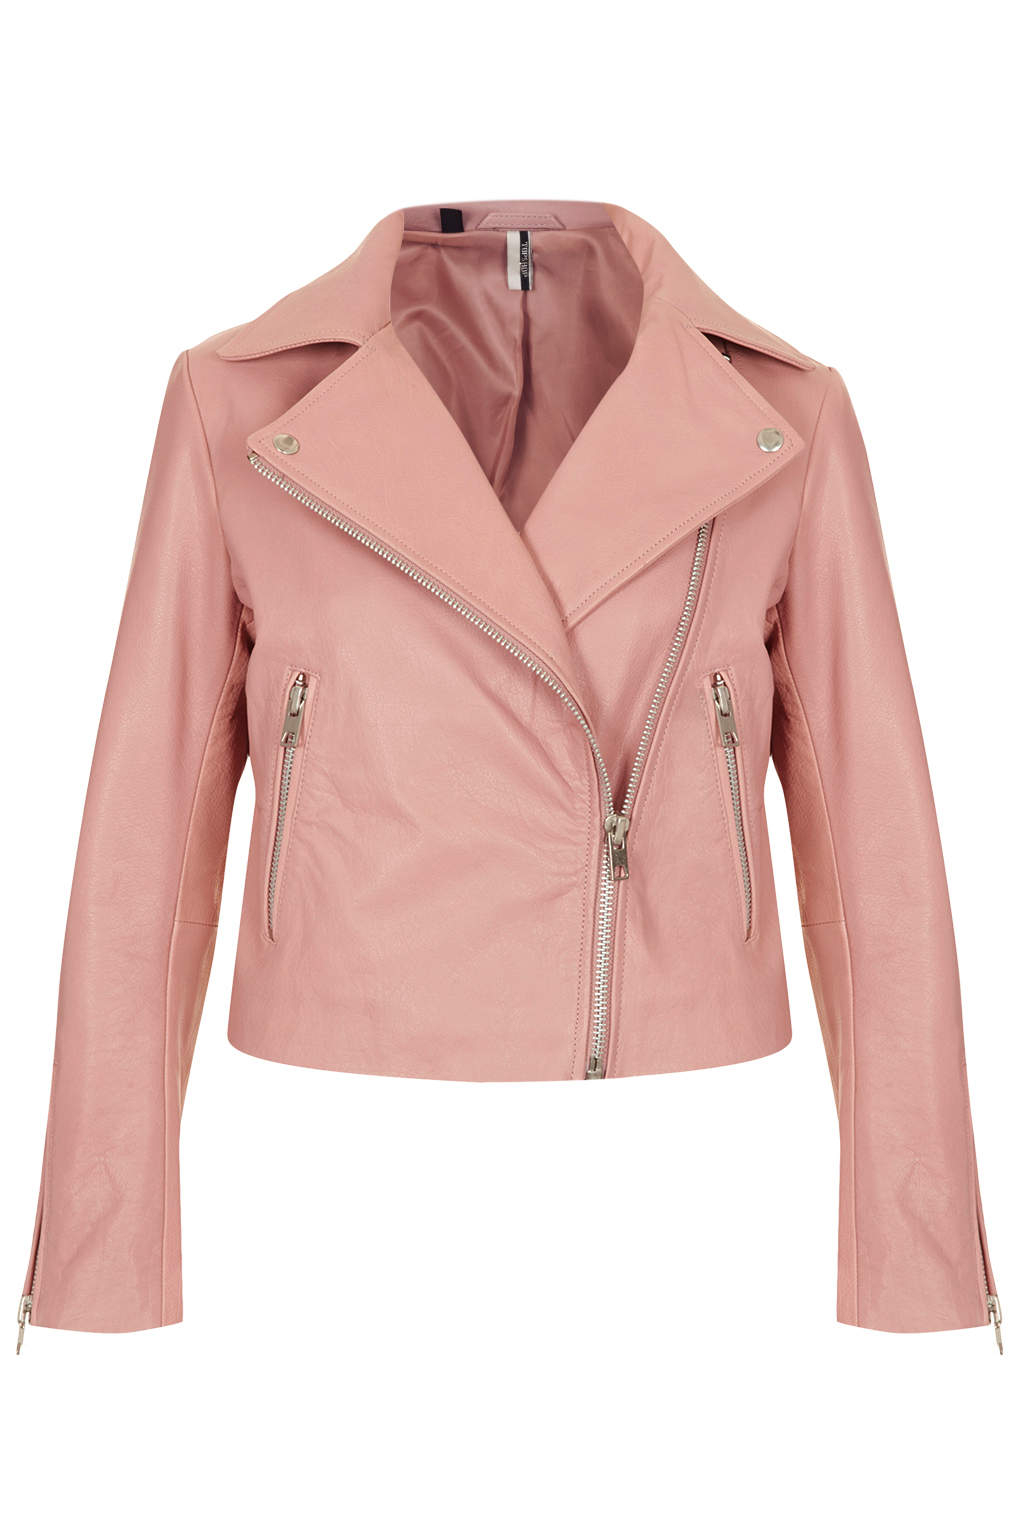 Topshop Boxy Leather Biker Jacket  in Pink  Lyst